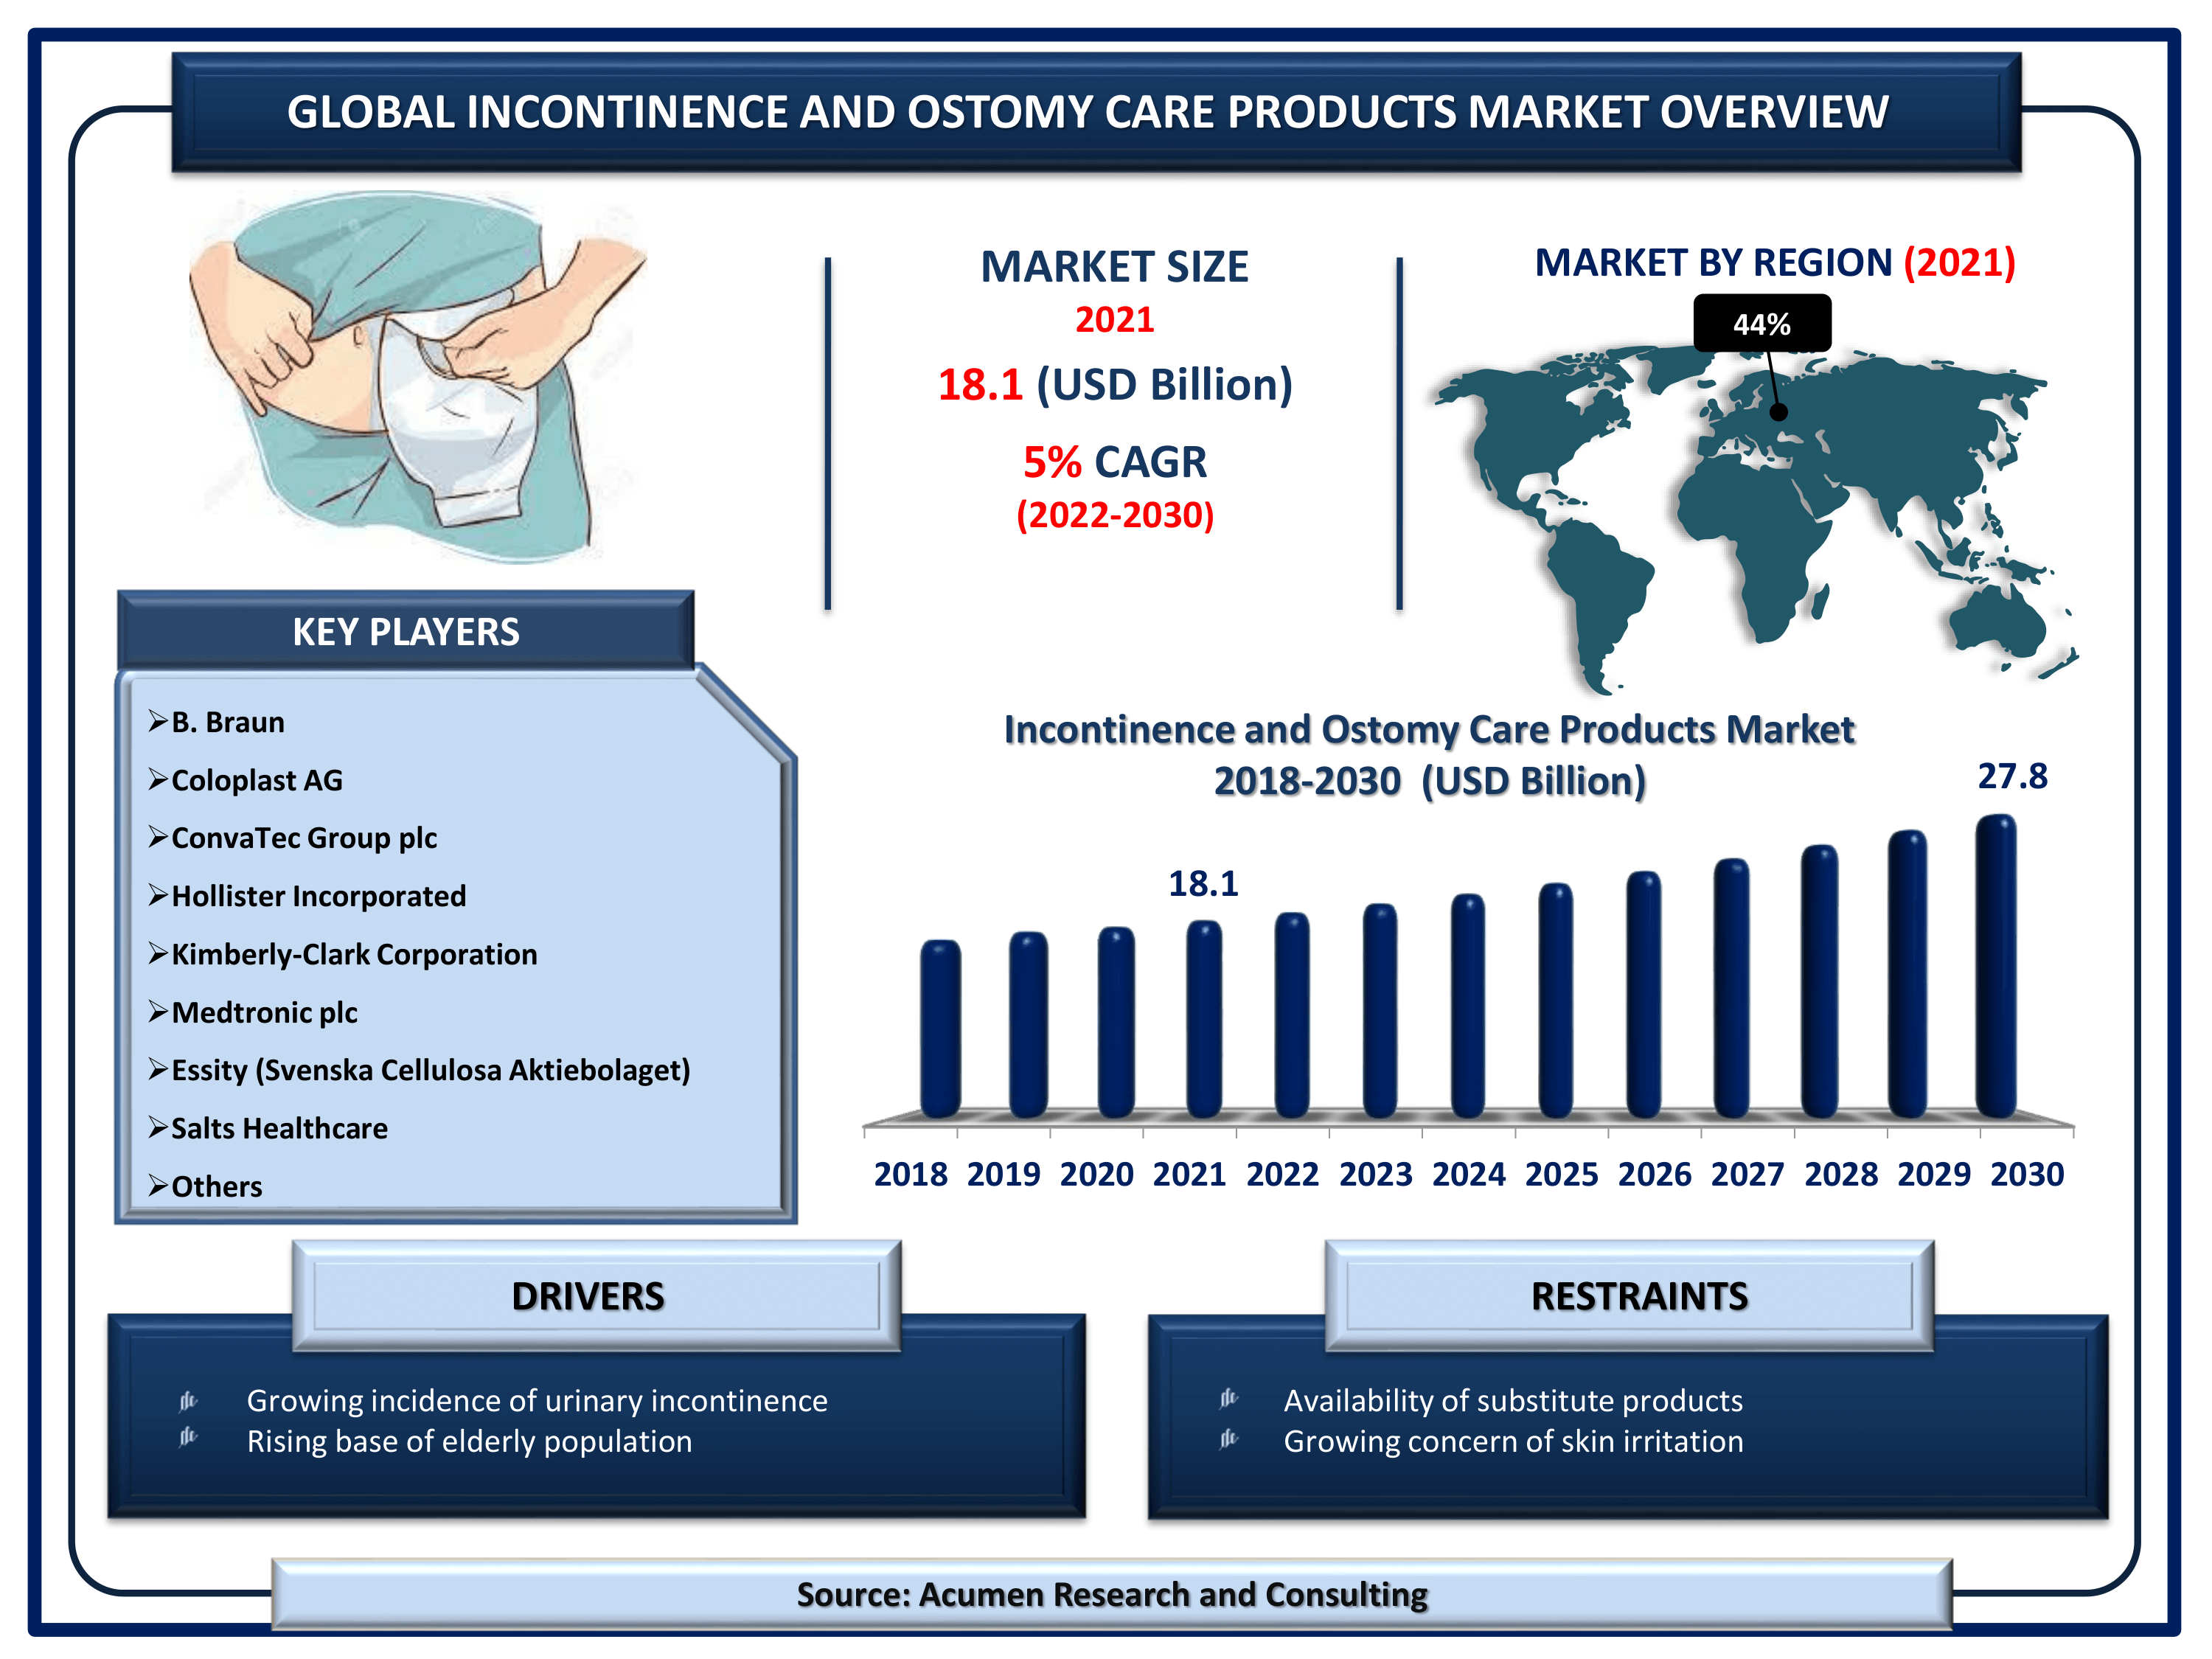 Global incontinence and ostomy care products market revenue is estimated to reach USD 27.8 Billion by 2030 with a CAGR of 5% from 2022 to 2030